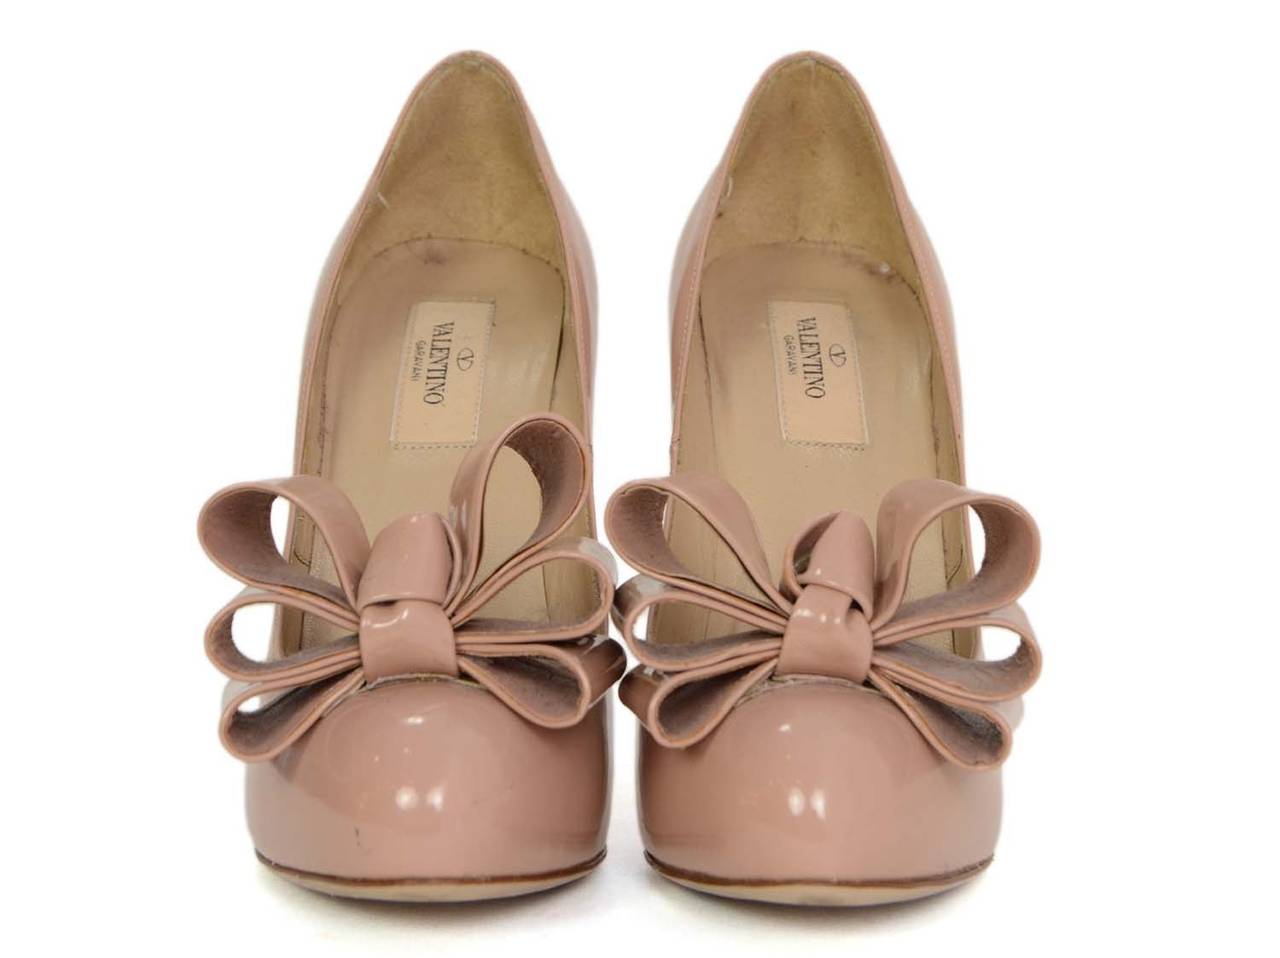 Valentino Nude Patent Leather Pumps
Features large bows at toes
Made in: Italy
Color: Nude
Composition: Patent leather
Sole Stamp: Valentino Garavani Made in Italy 37
Closure/opening: Slide on
Overall Condition: Very good with the exception